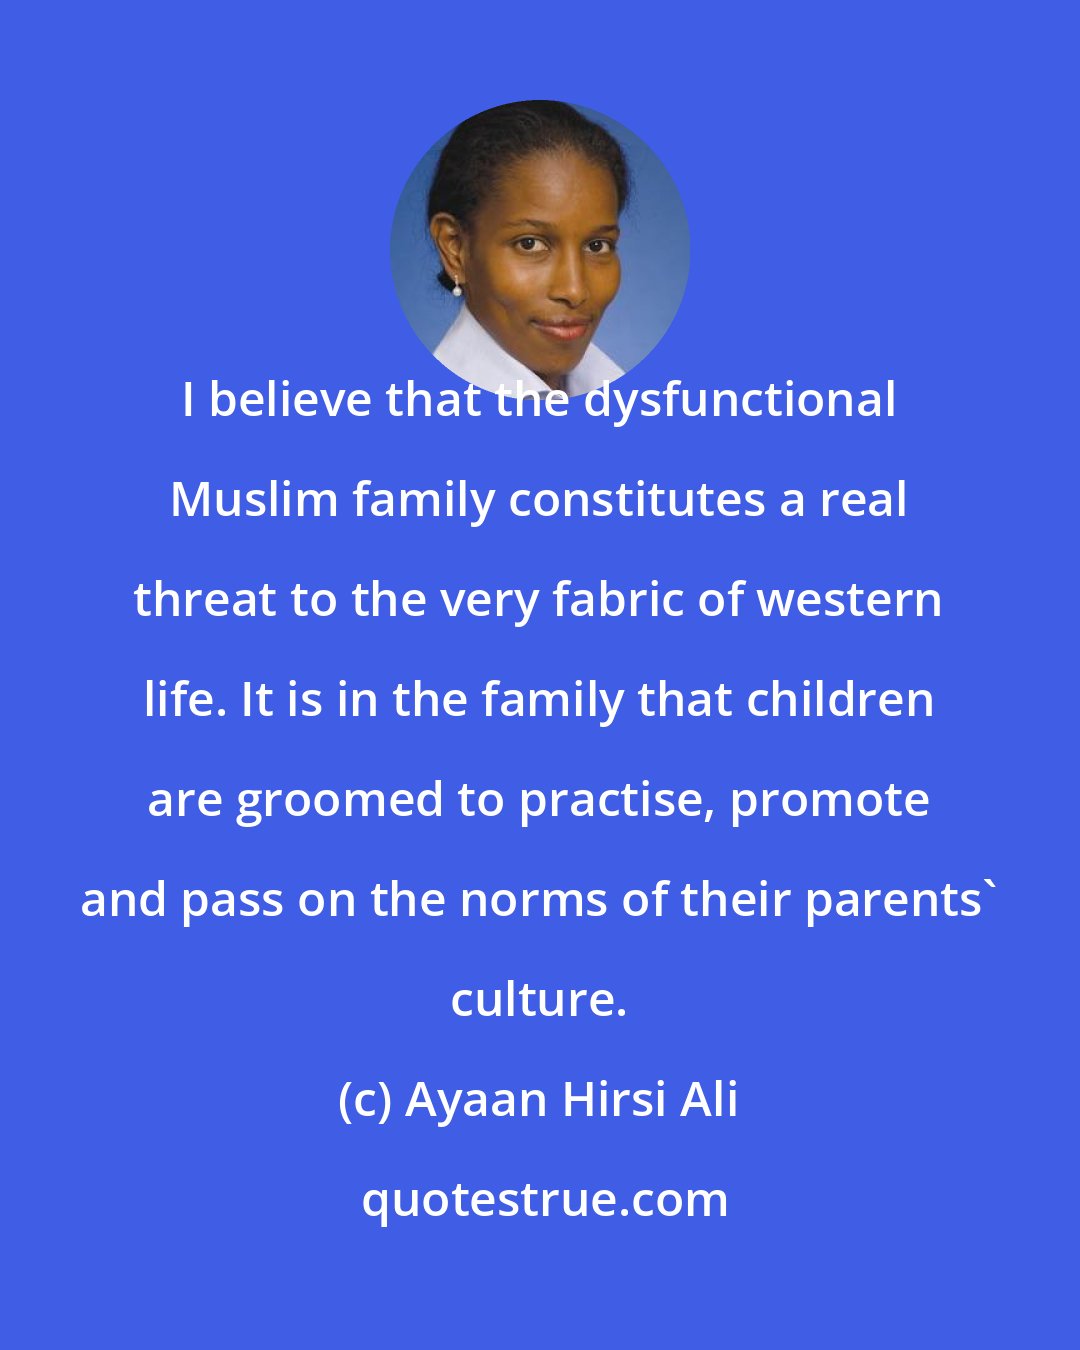 Ayaan Hirsi Ali: I believe that the dysfunctional Muslim family constitutes a real threat to the very fabric of western life. It is in the family that children are groomed to practise, promote and pass on the norms of their parents' culture.